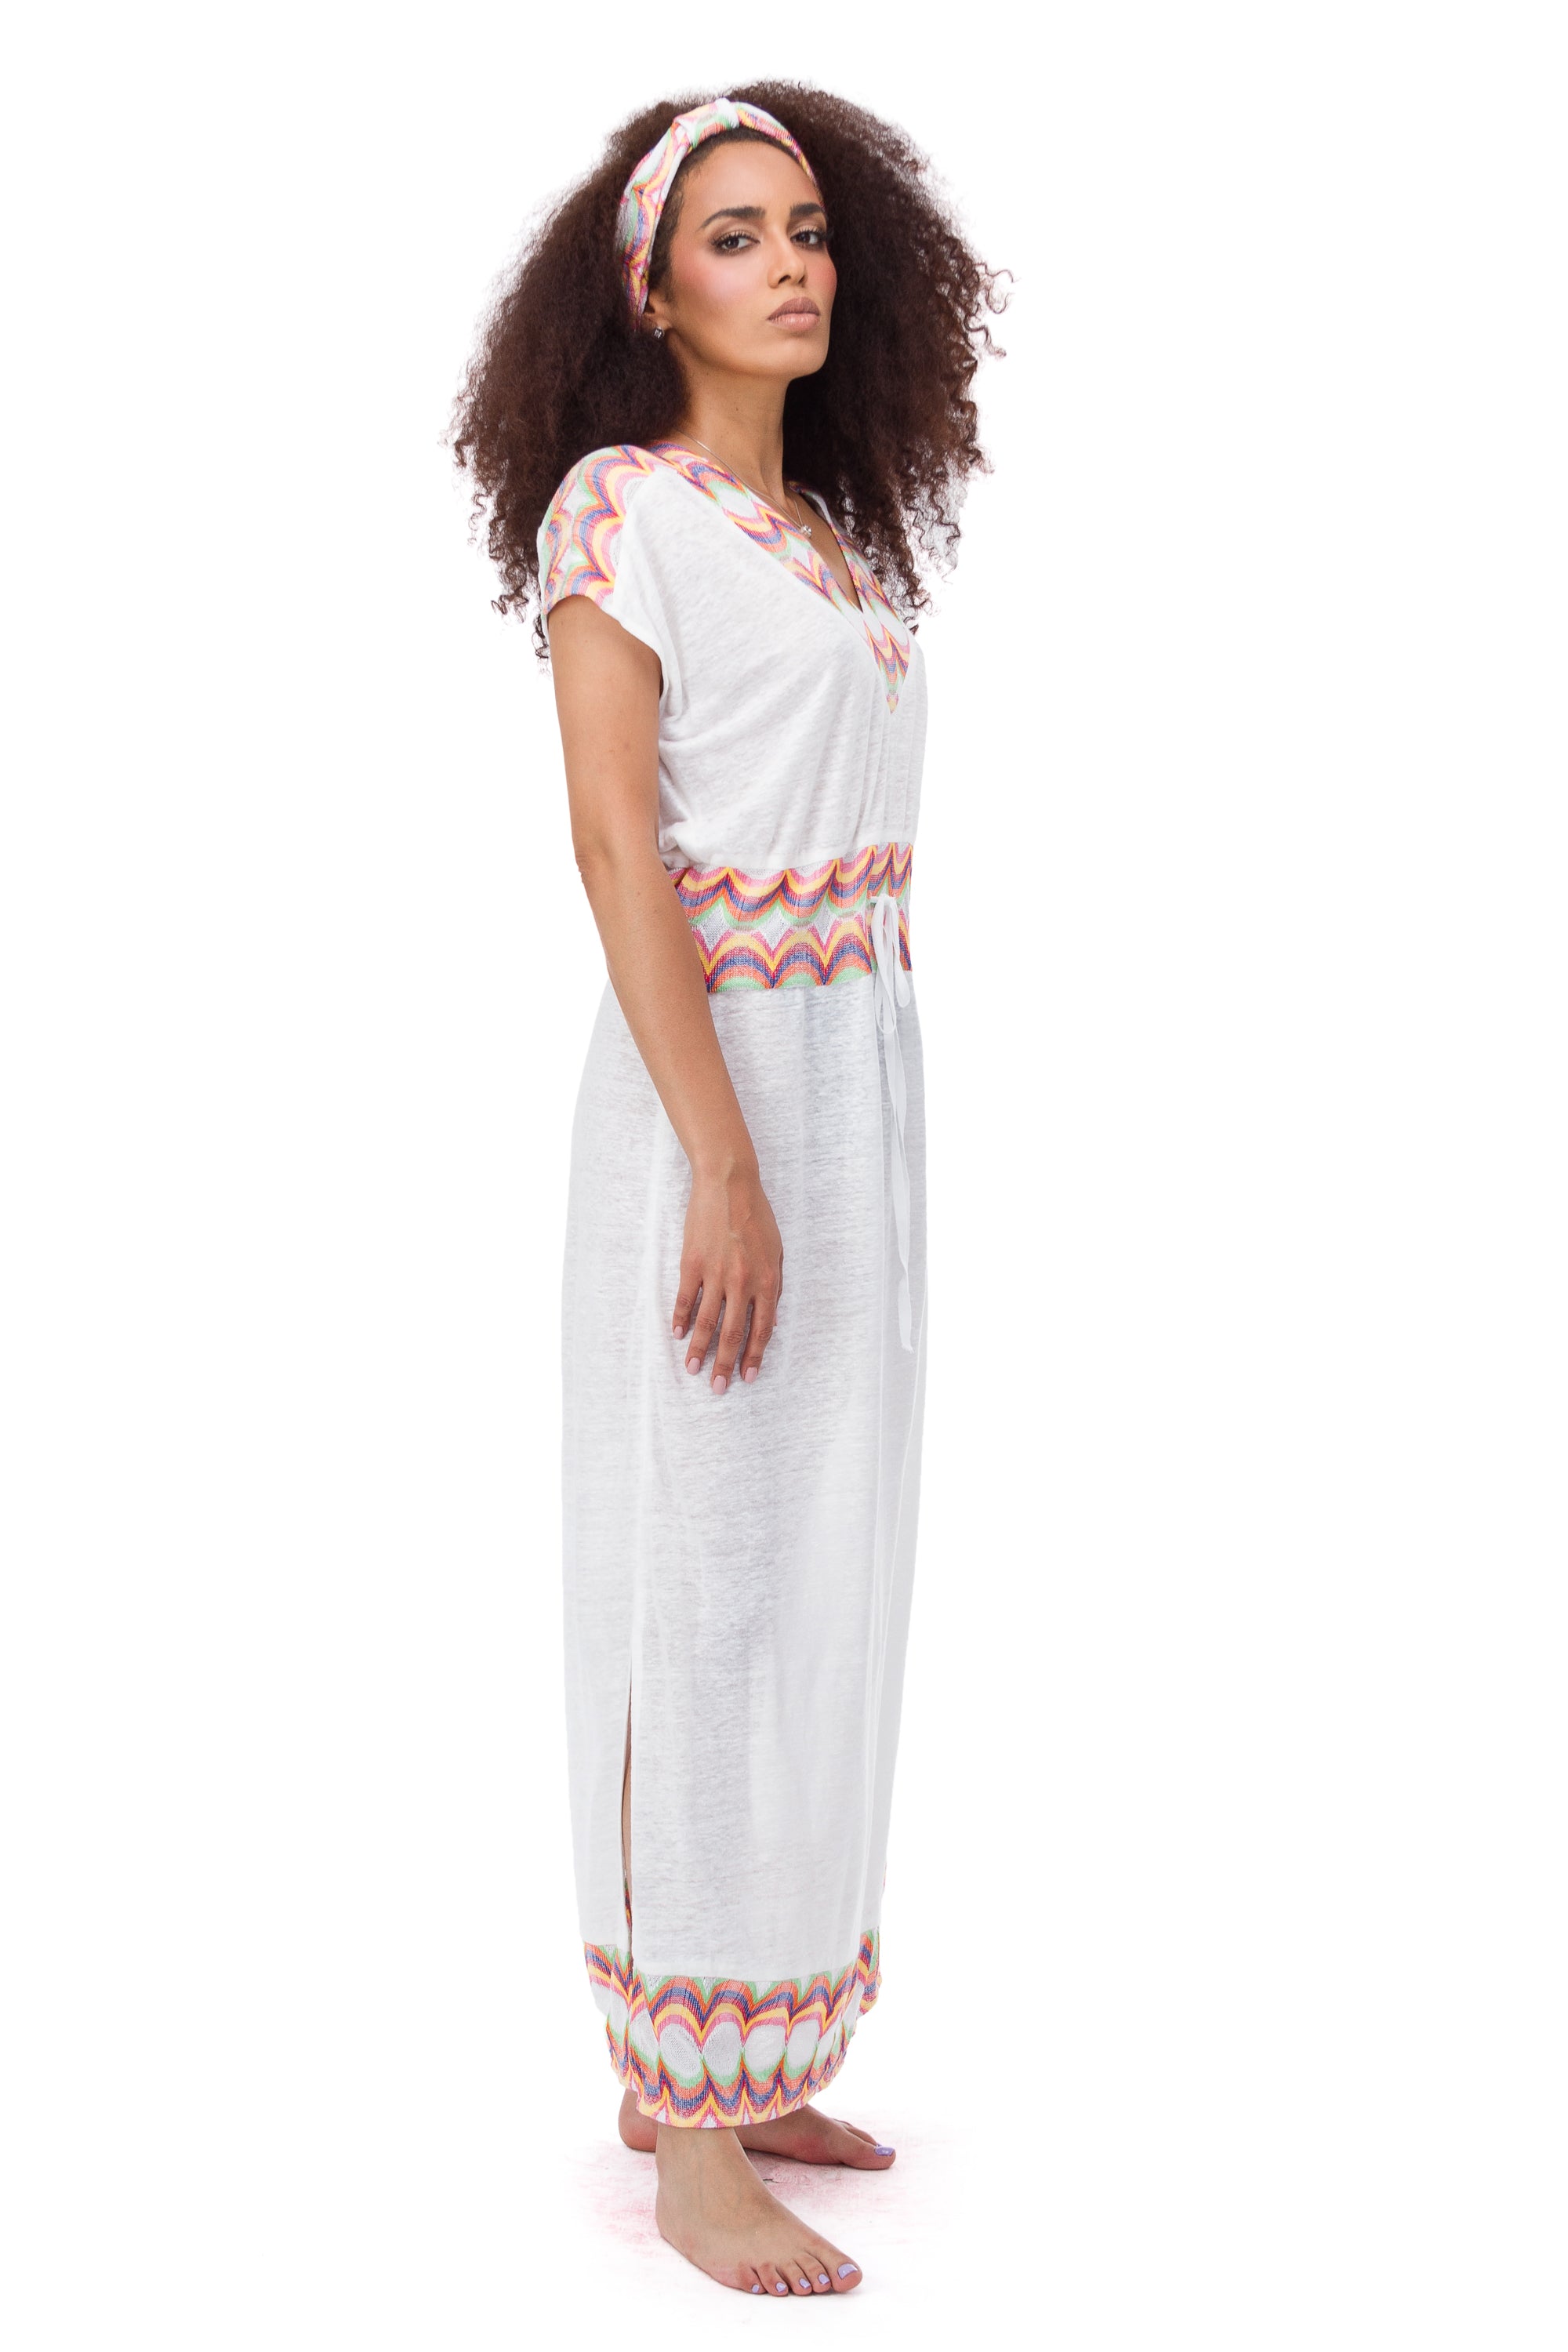 White linen and cotton dress with a color pattern